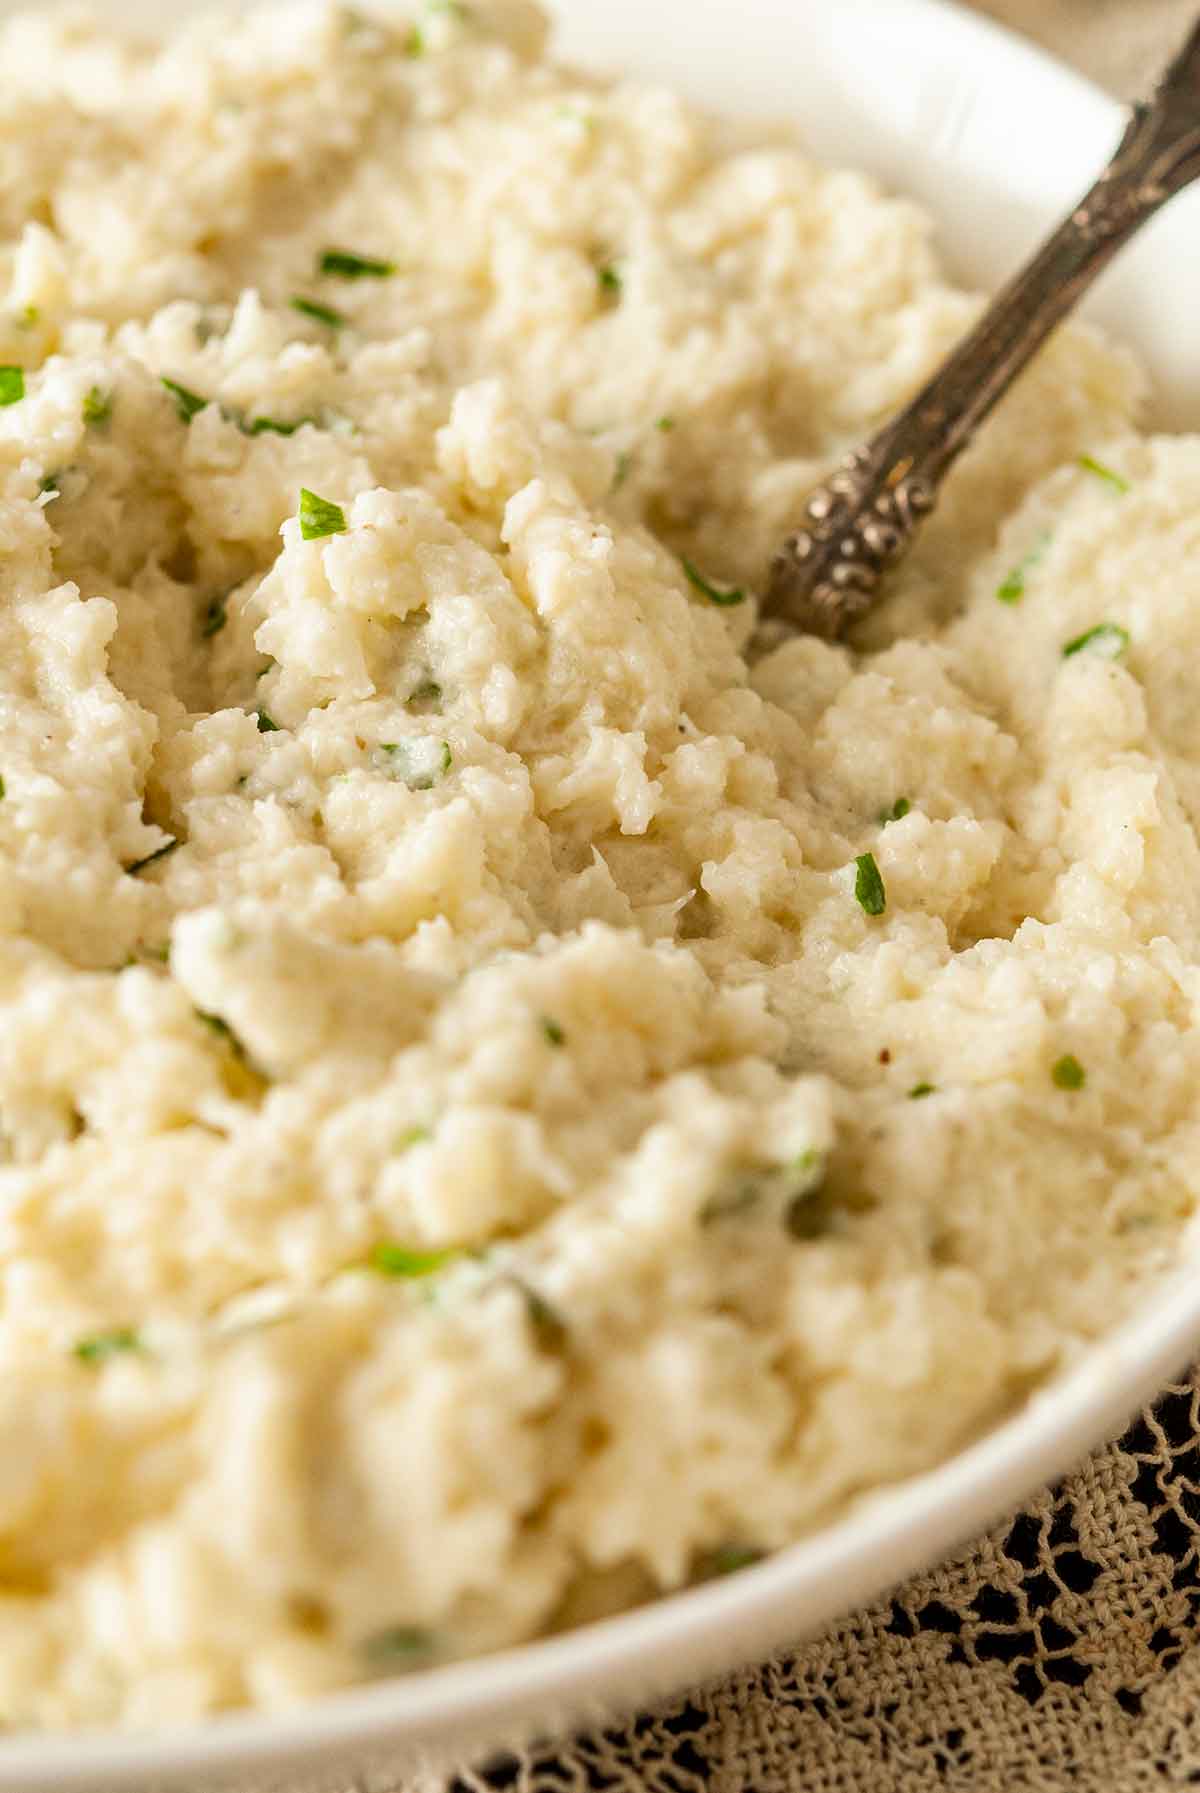 A bowl of garlic-parmesan mashed cauliflower with finely-diced parsley and an antique spoon.